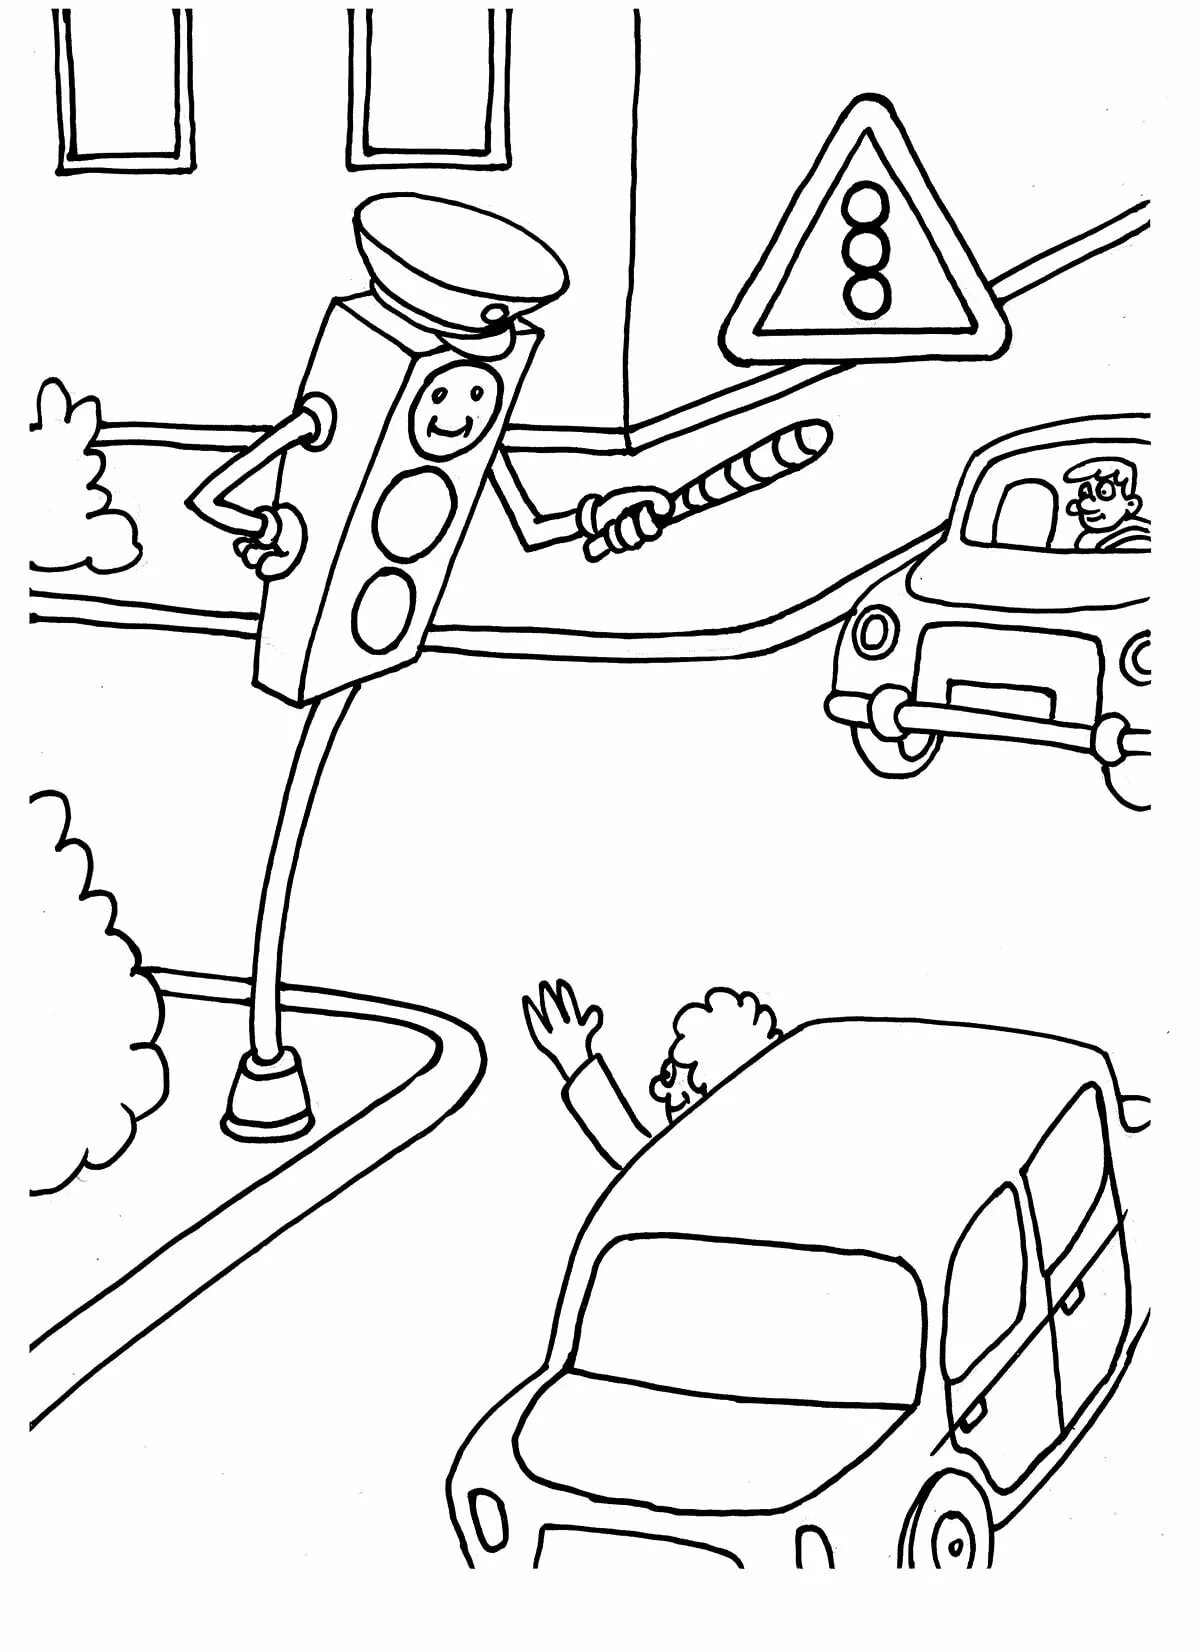 Magic road sign coloring page